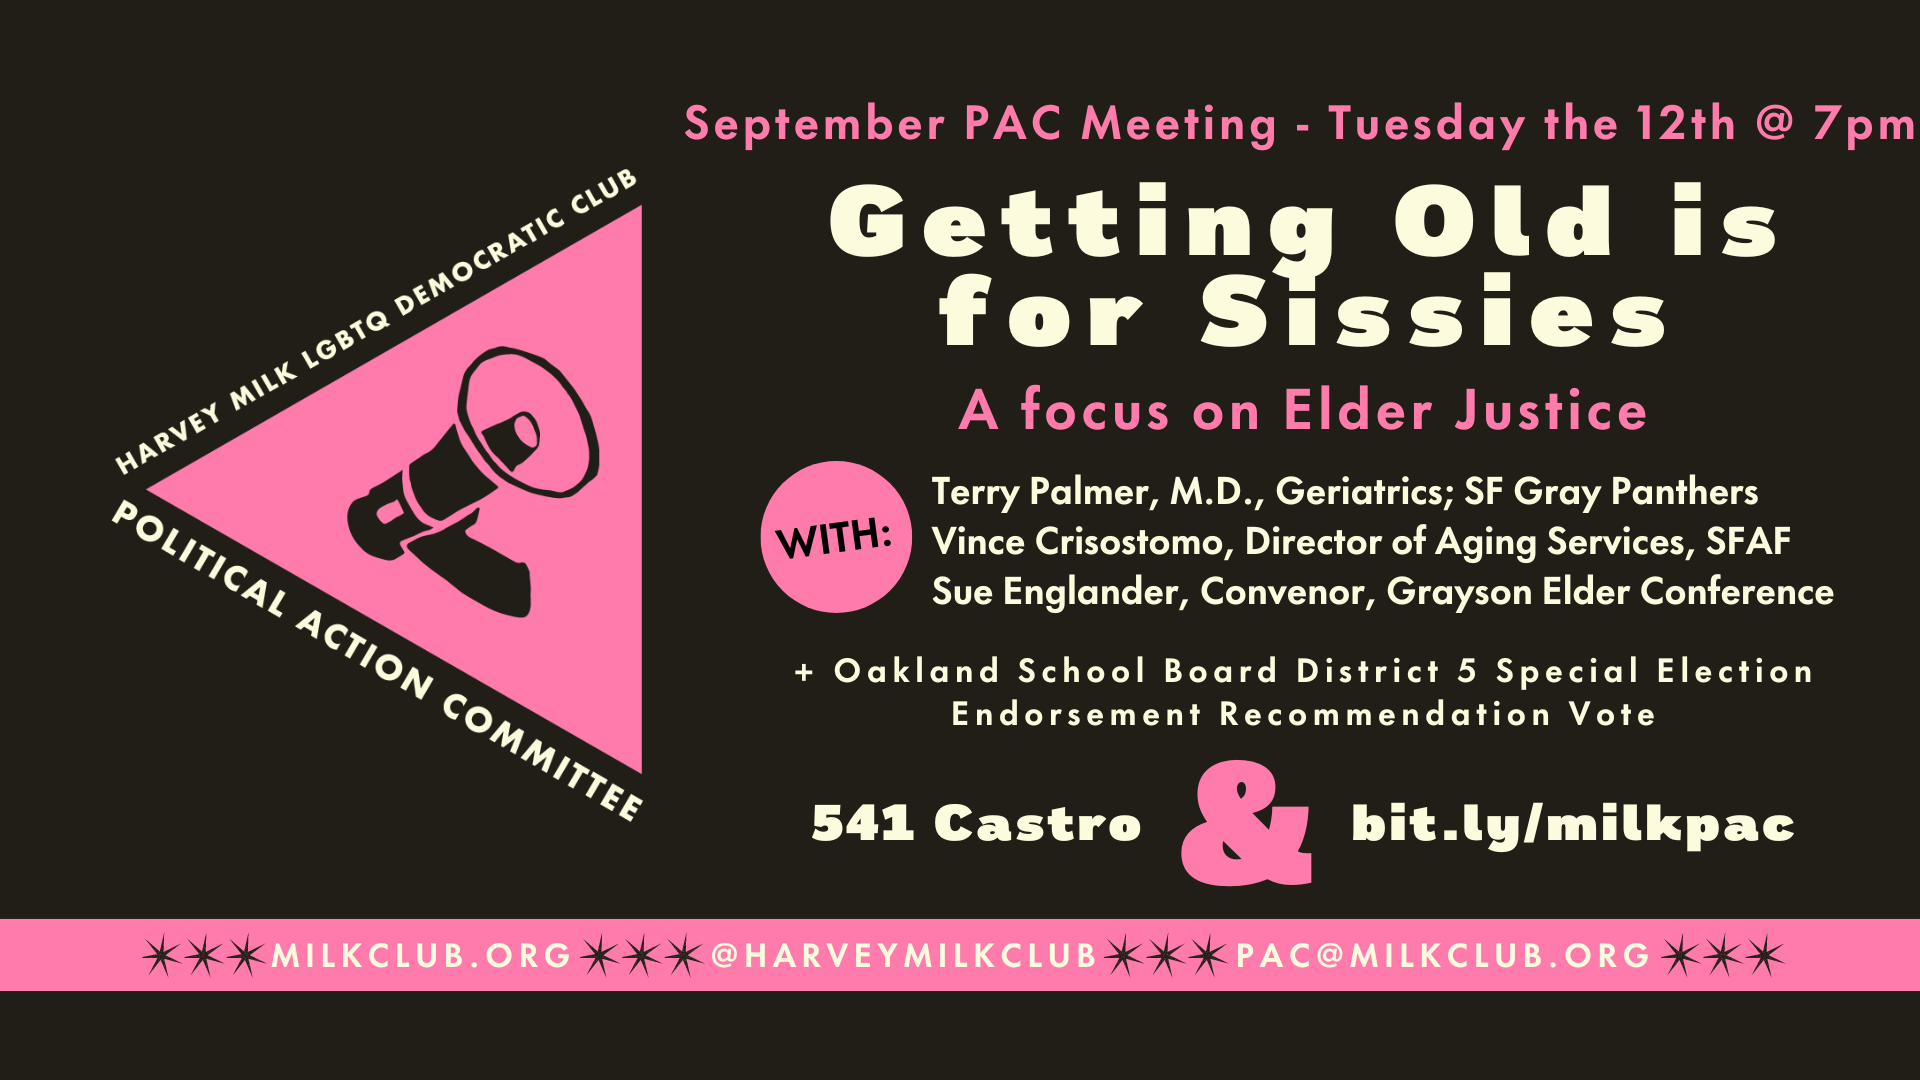 September PAC Meeting Getting Old is for Sissies: A focus on Elder Justice! @ 541 Castro St. and bit.ly/milkpac